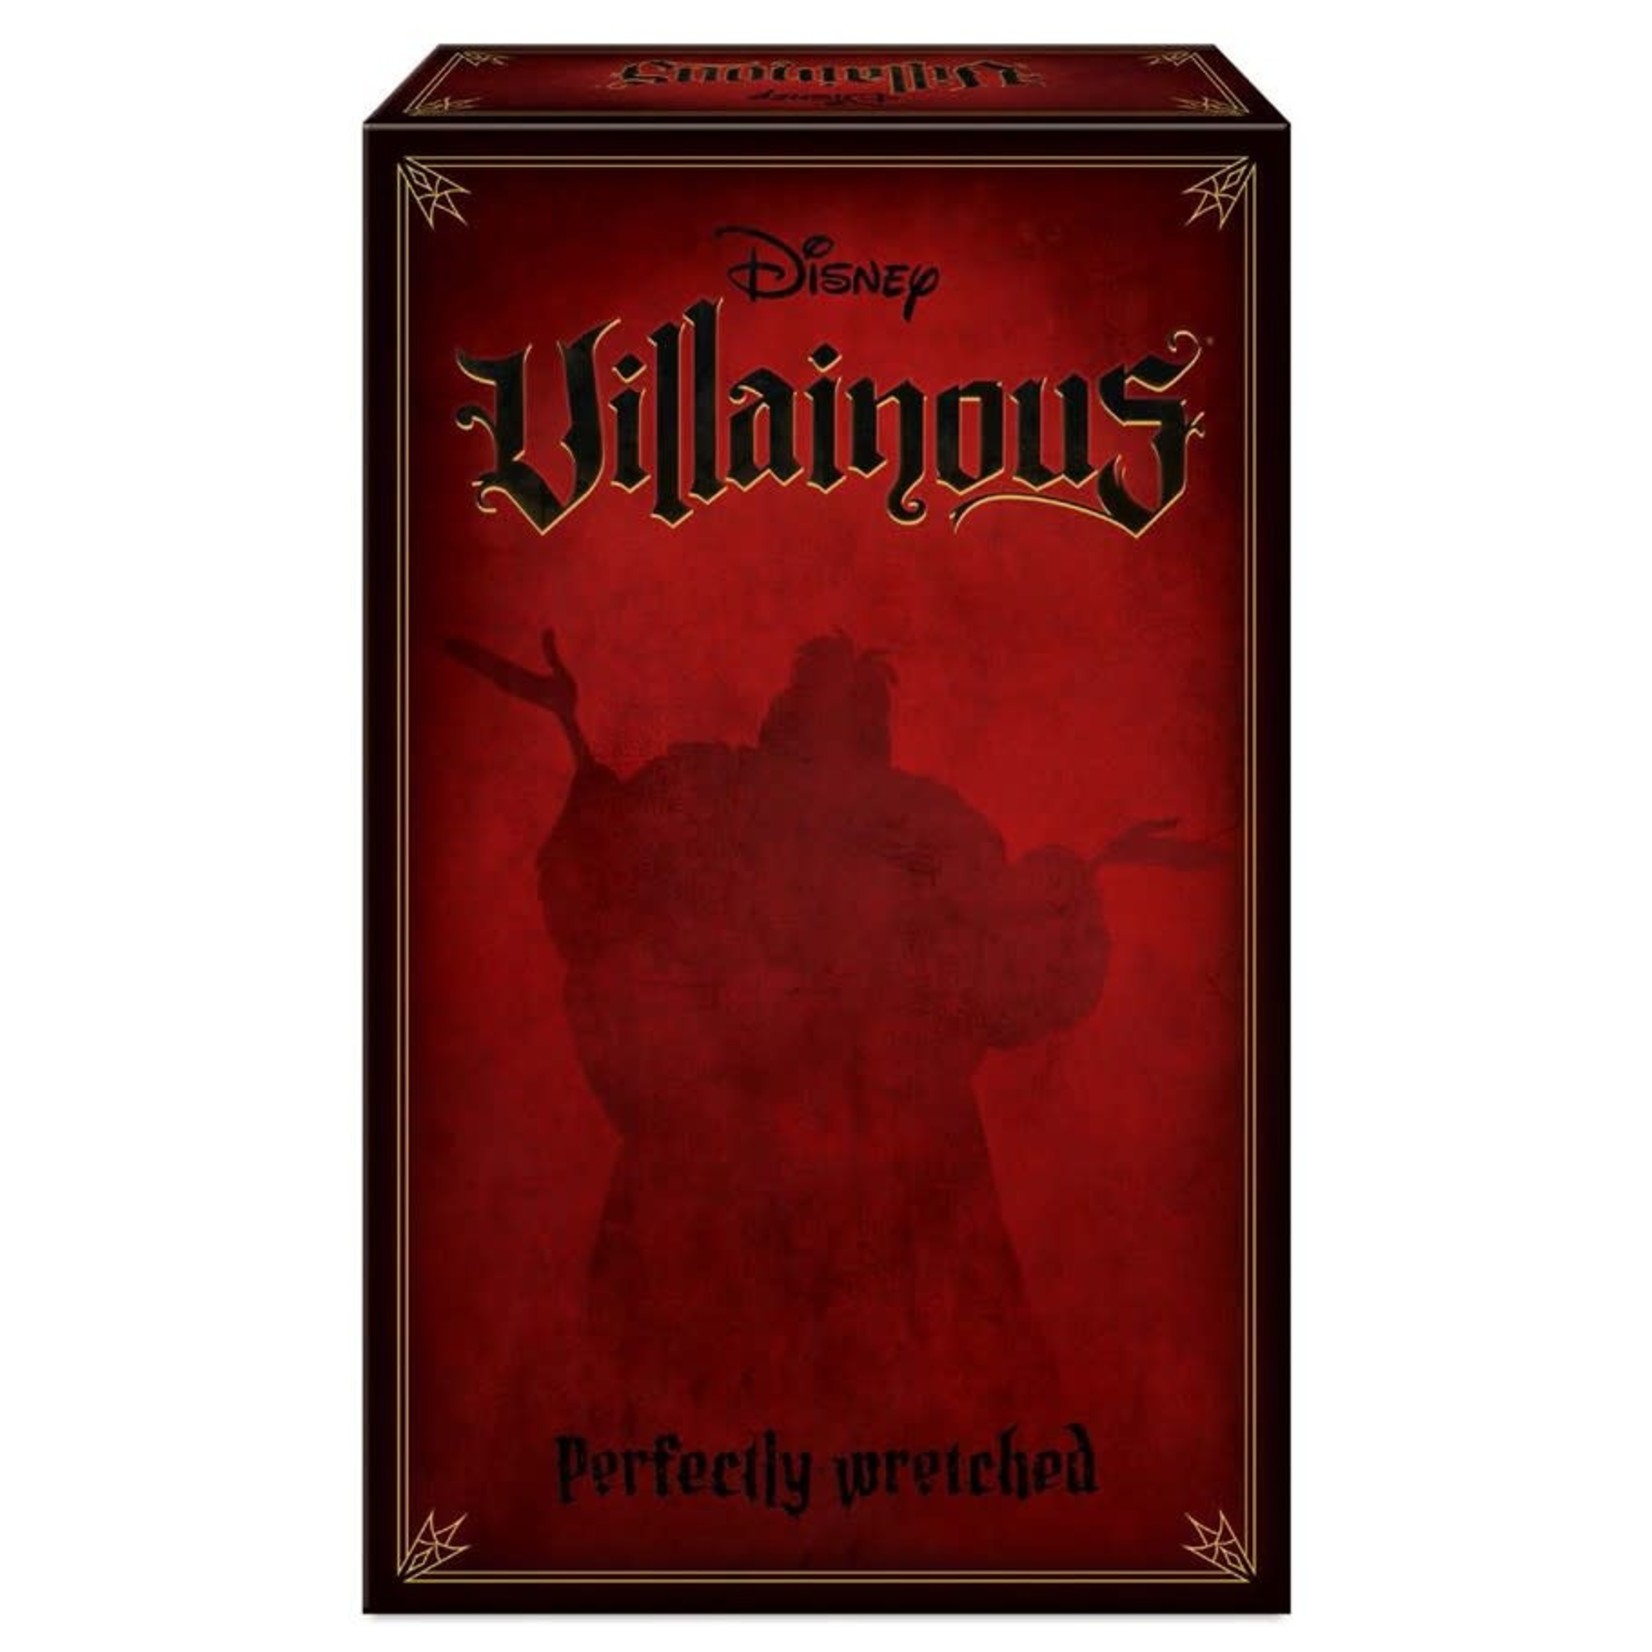 Ravensburger North America Villainous: Perfectly Wretched Expansion